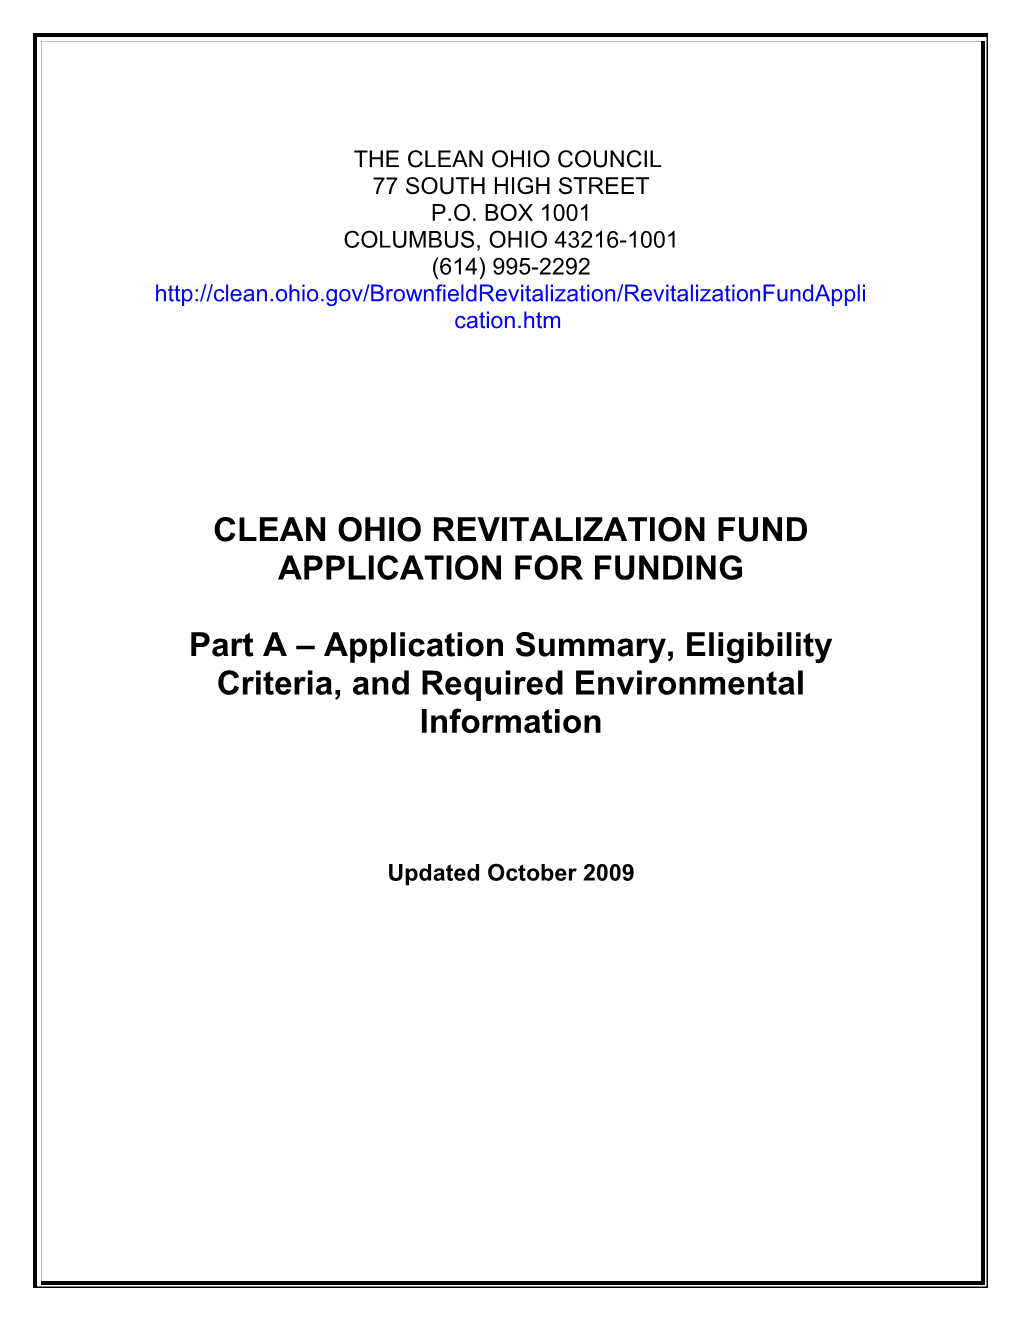 Application for Clean Ohio Revitalization Funds